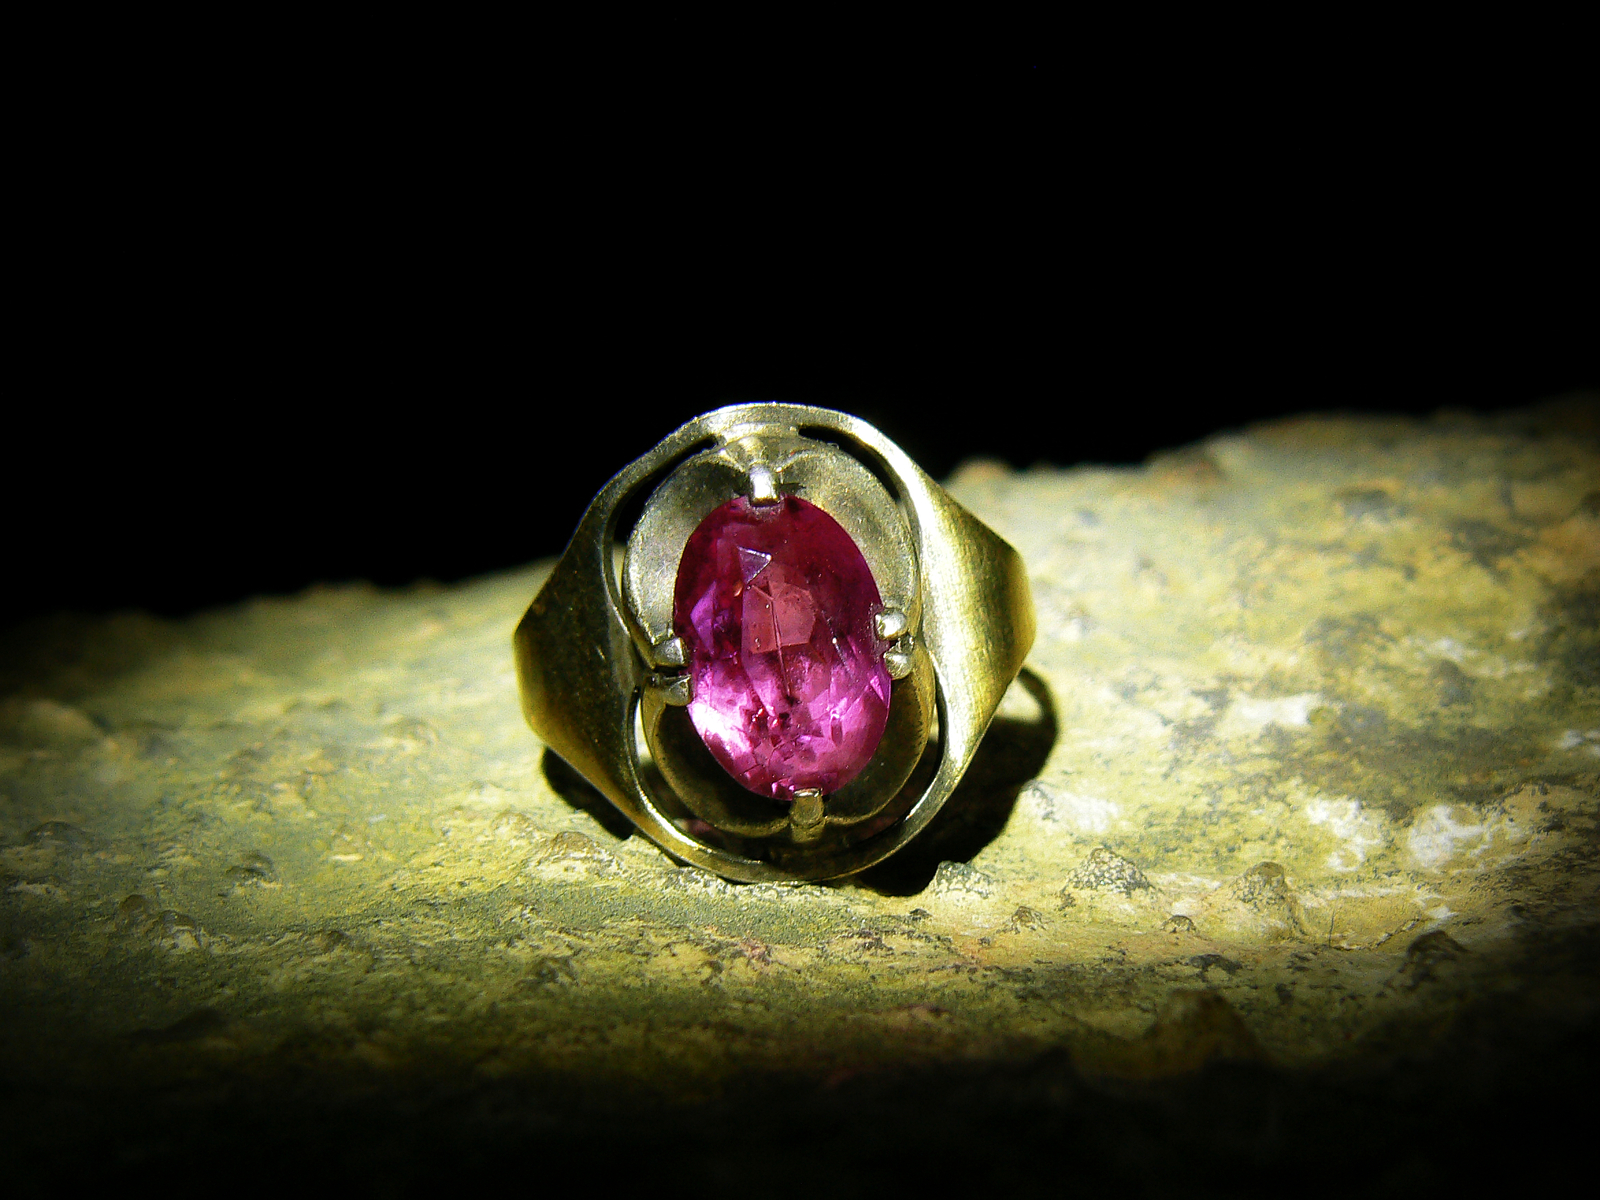 Haunted QUEEN MA'AT EGYPTIAN GODDESS HEAVEN LADY Ruby Gold Sterling Ring izida - $434.00